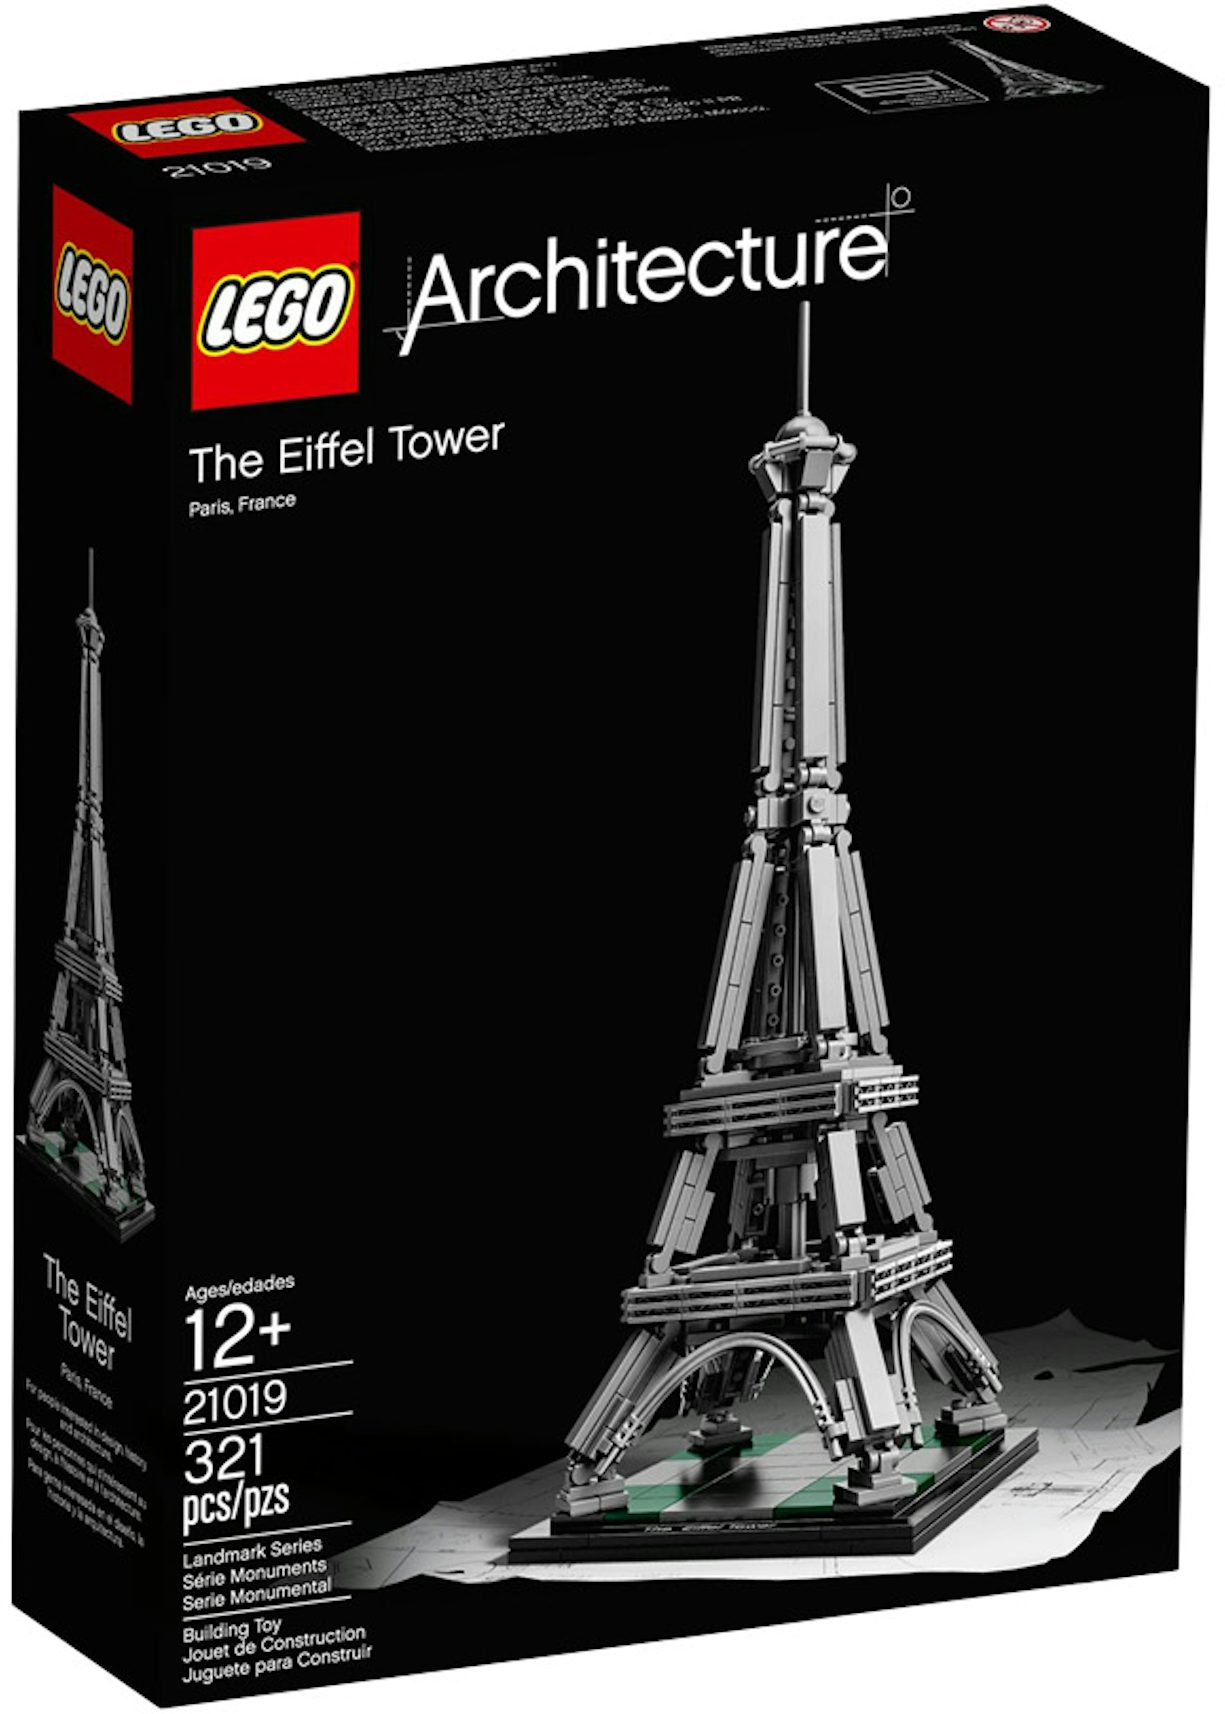 LEGO ARCHITECTURE 21019 The Eiffel Tower set 100% complete